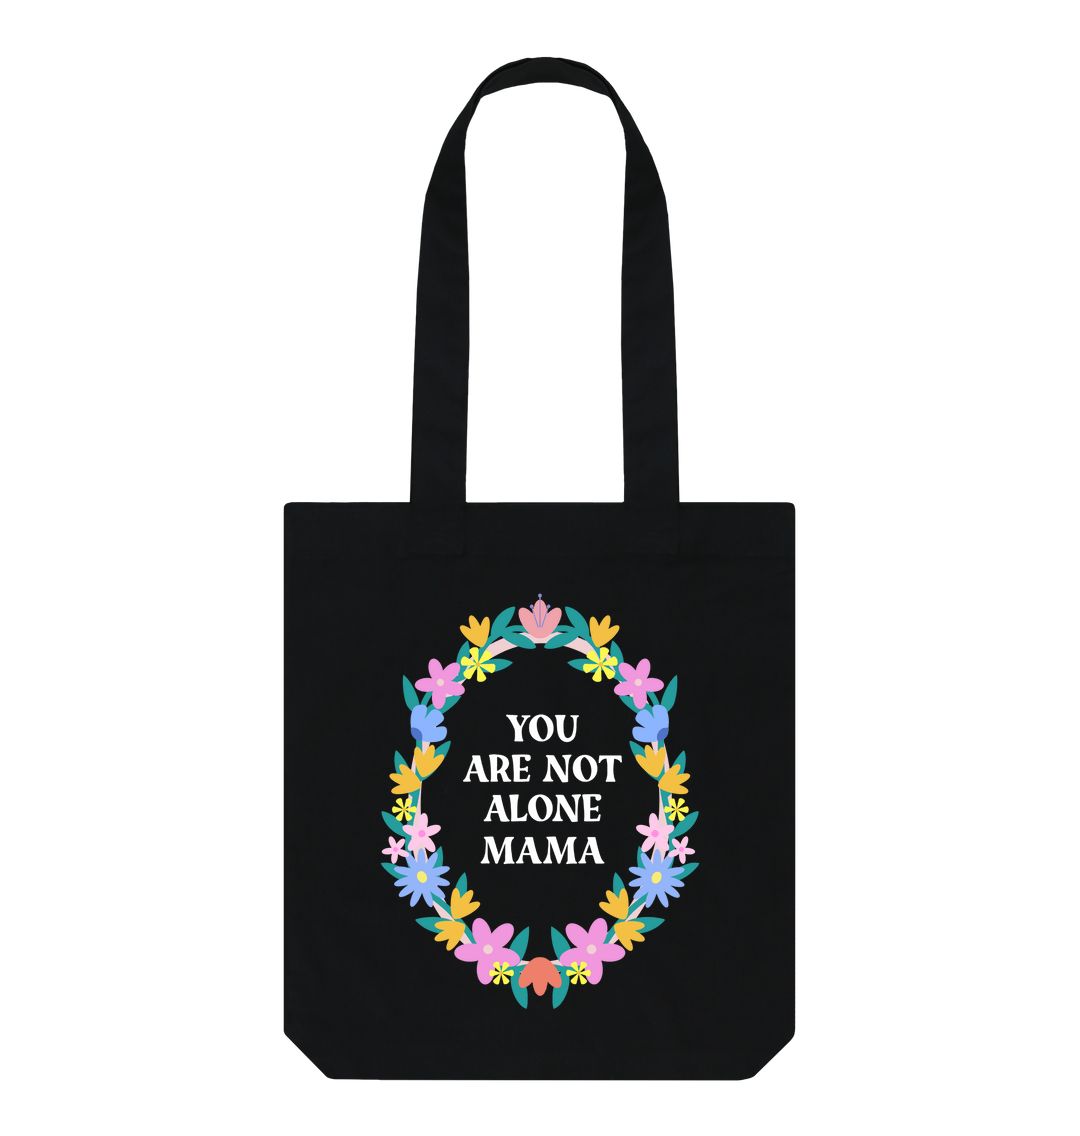 You Are Not Alone Mama Tote Bag - Black